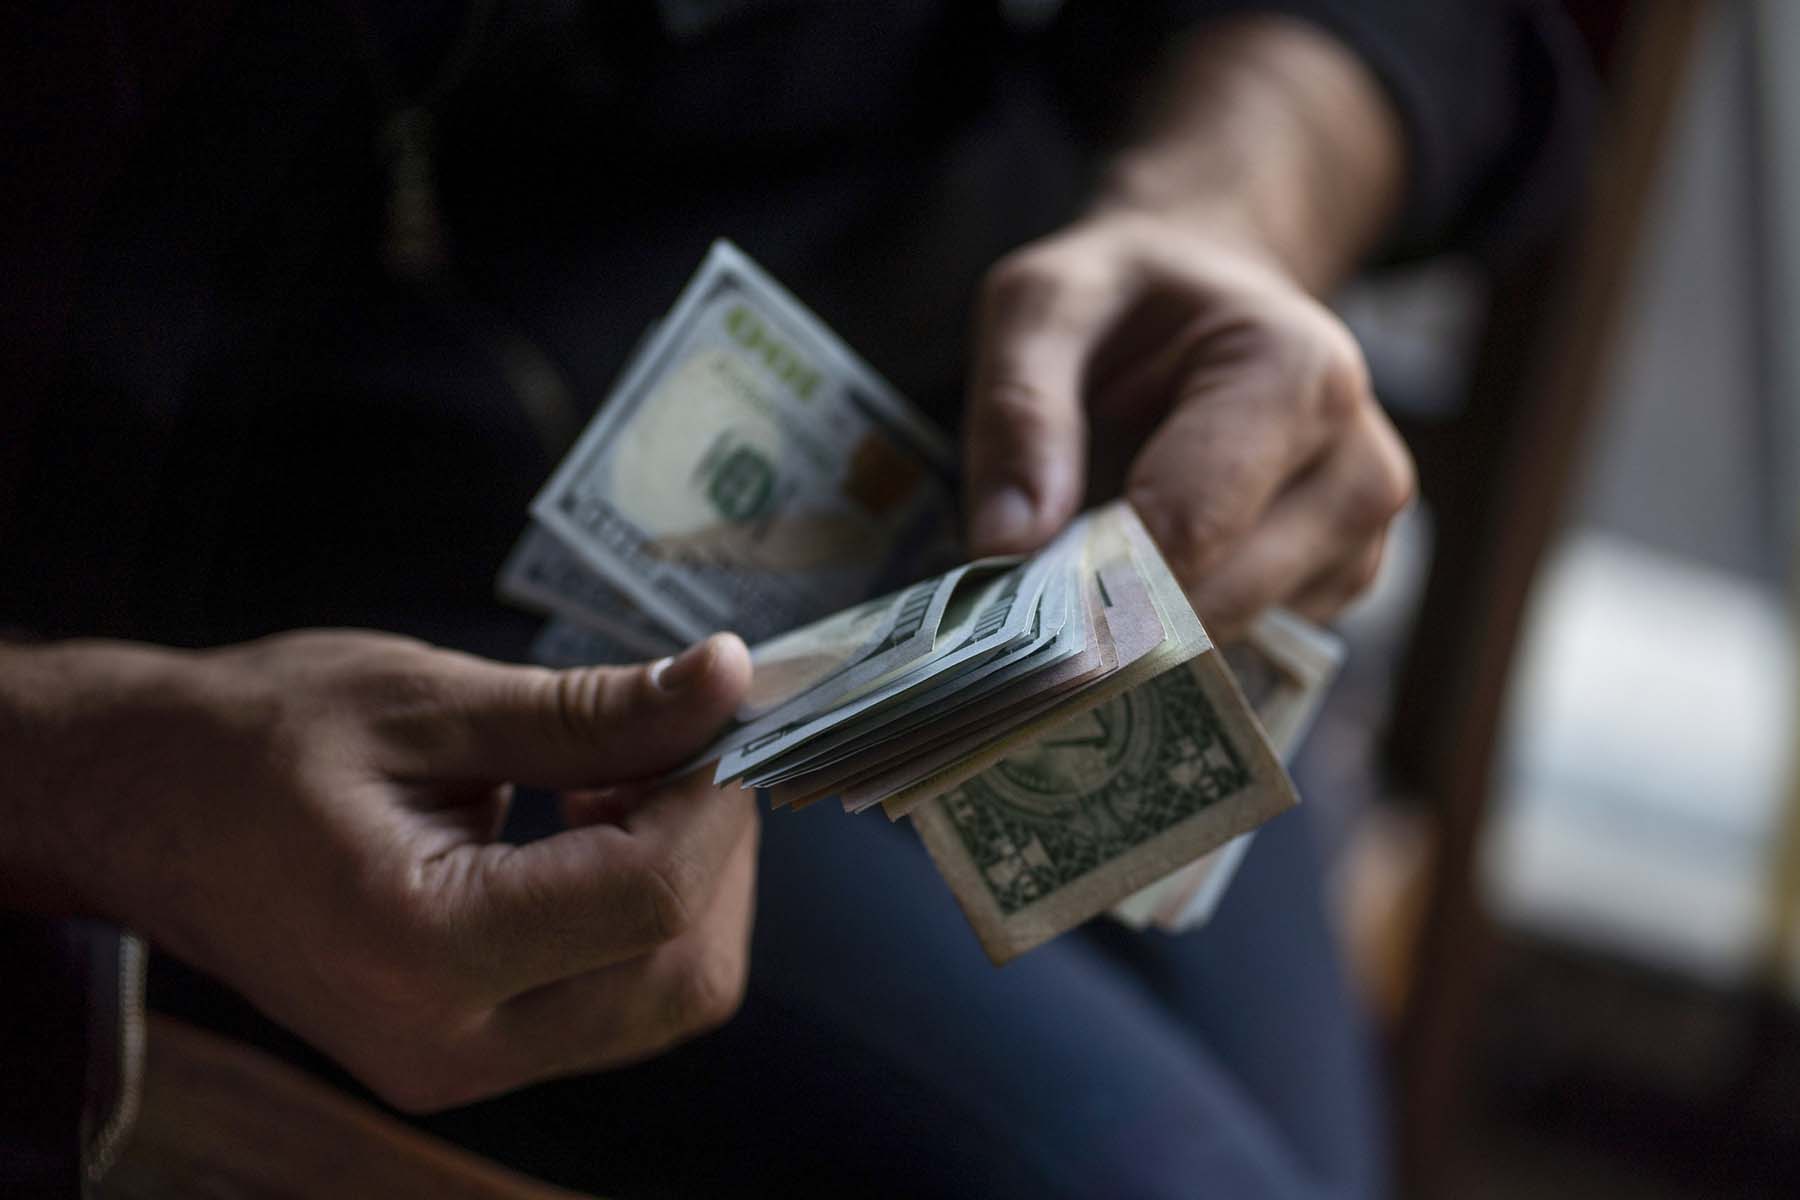 Closeup of person's hands counting cash